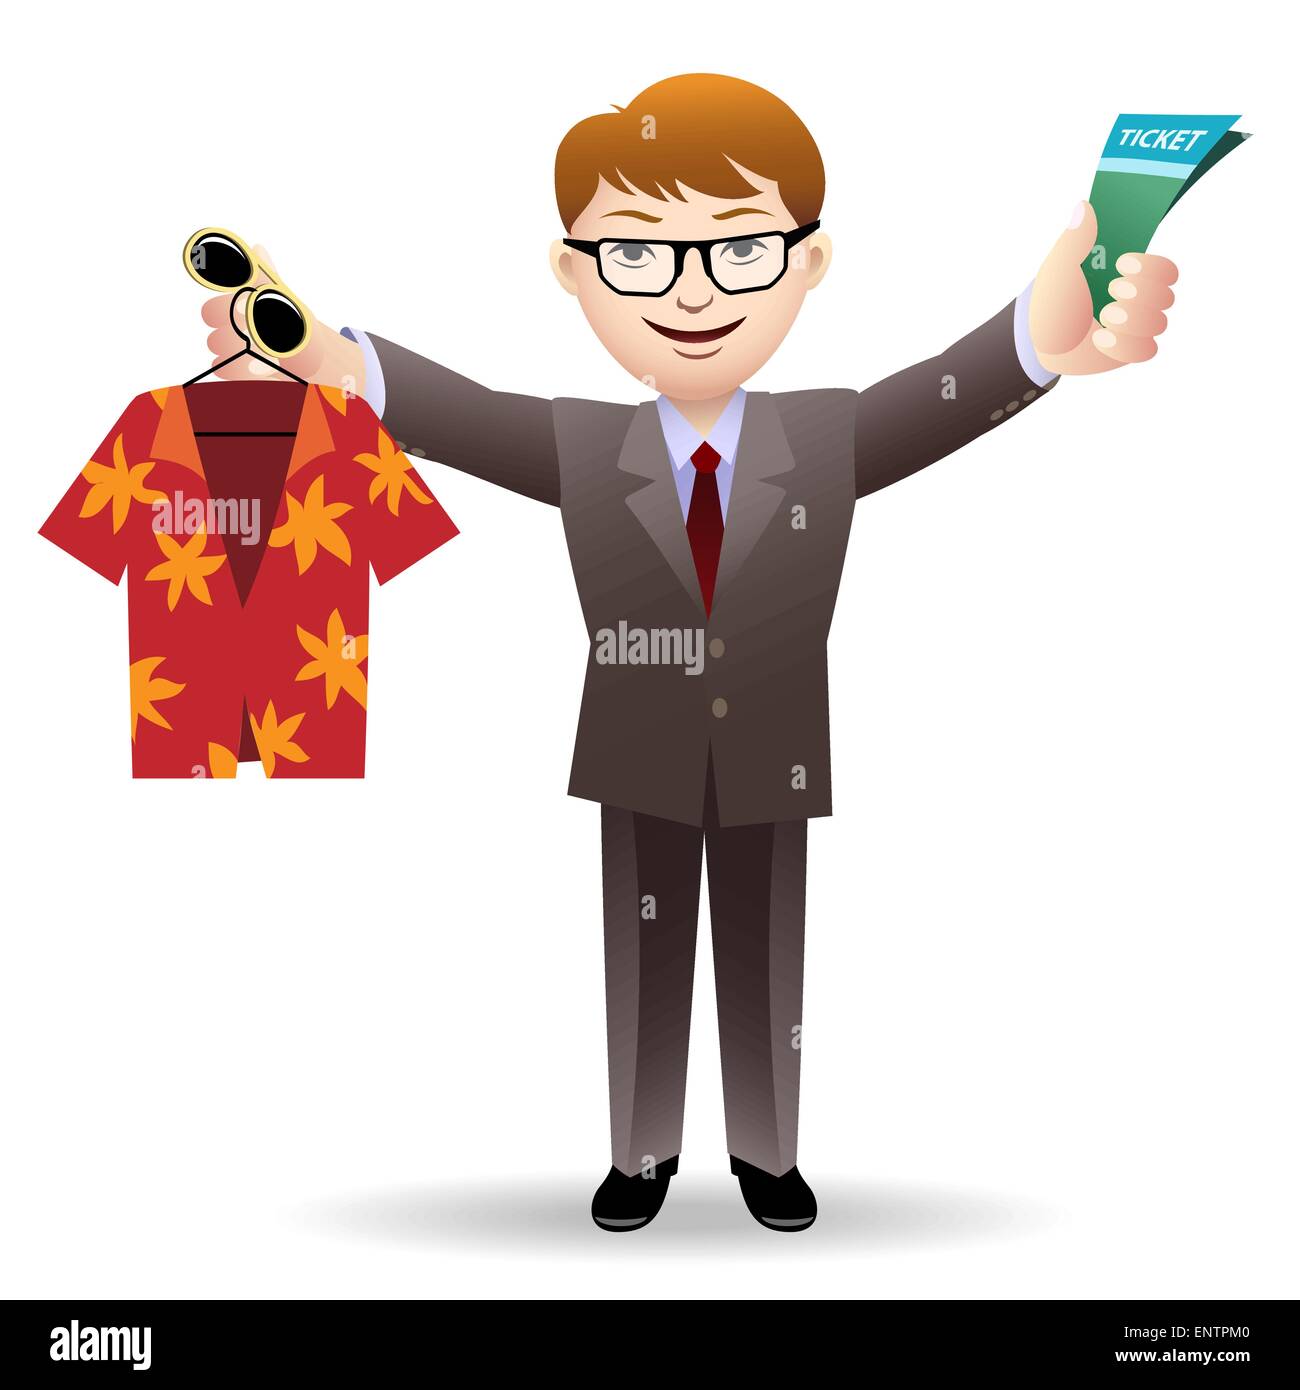 Joyful young man in office suit with ticket, tropical shirt and sunglasses in hands. Isolated on white background. Stock Vector